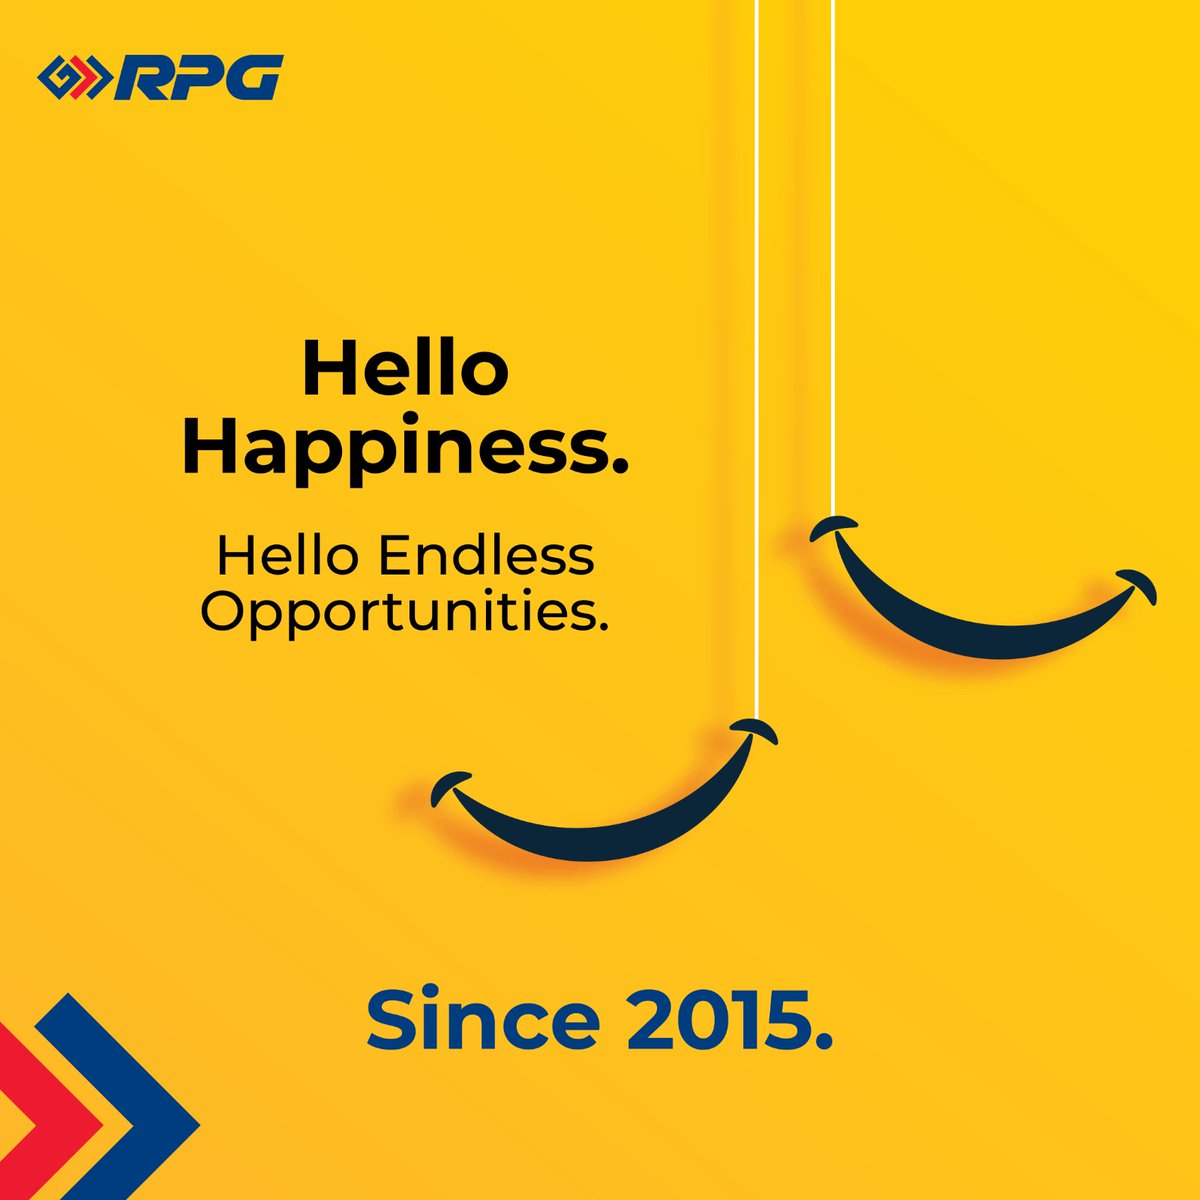 In 2015, we said Hello Happiness and opened doors to endless opportunities. Happiness is also this place called RPG, where extraordinary colleagues meet, inspiring leaders guide, and meaningful work leaves a lasting impact on businesses and lives around us. #ThrowbackThursday